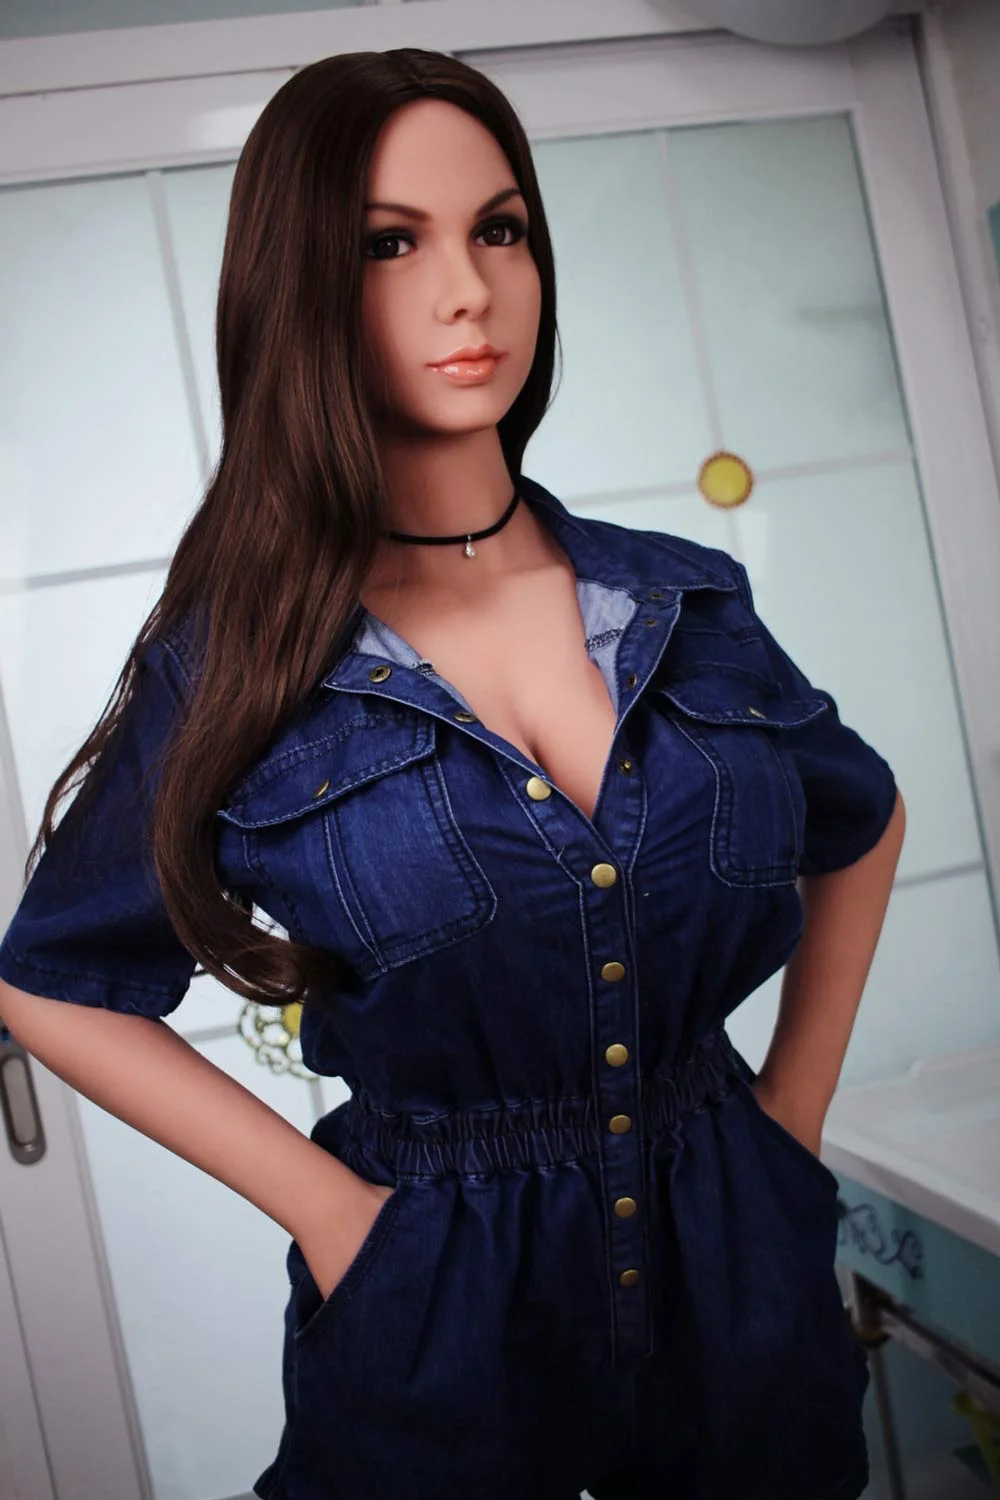 Sex doll with hands in trouser pockets